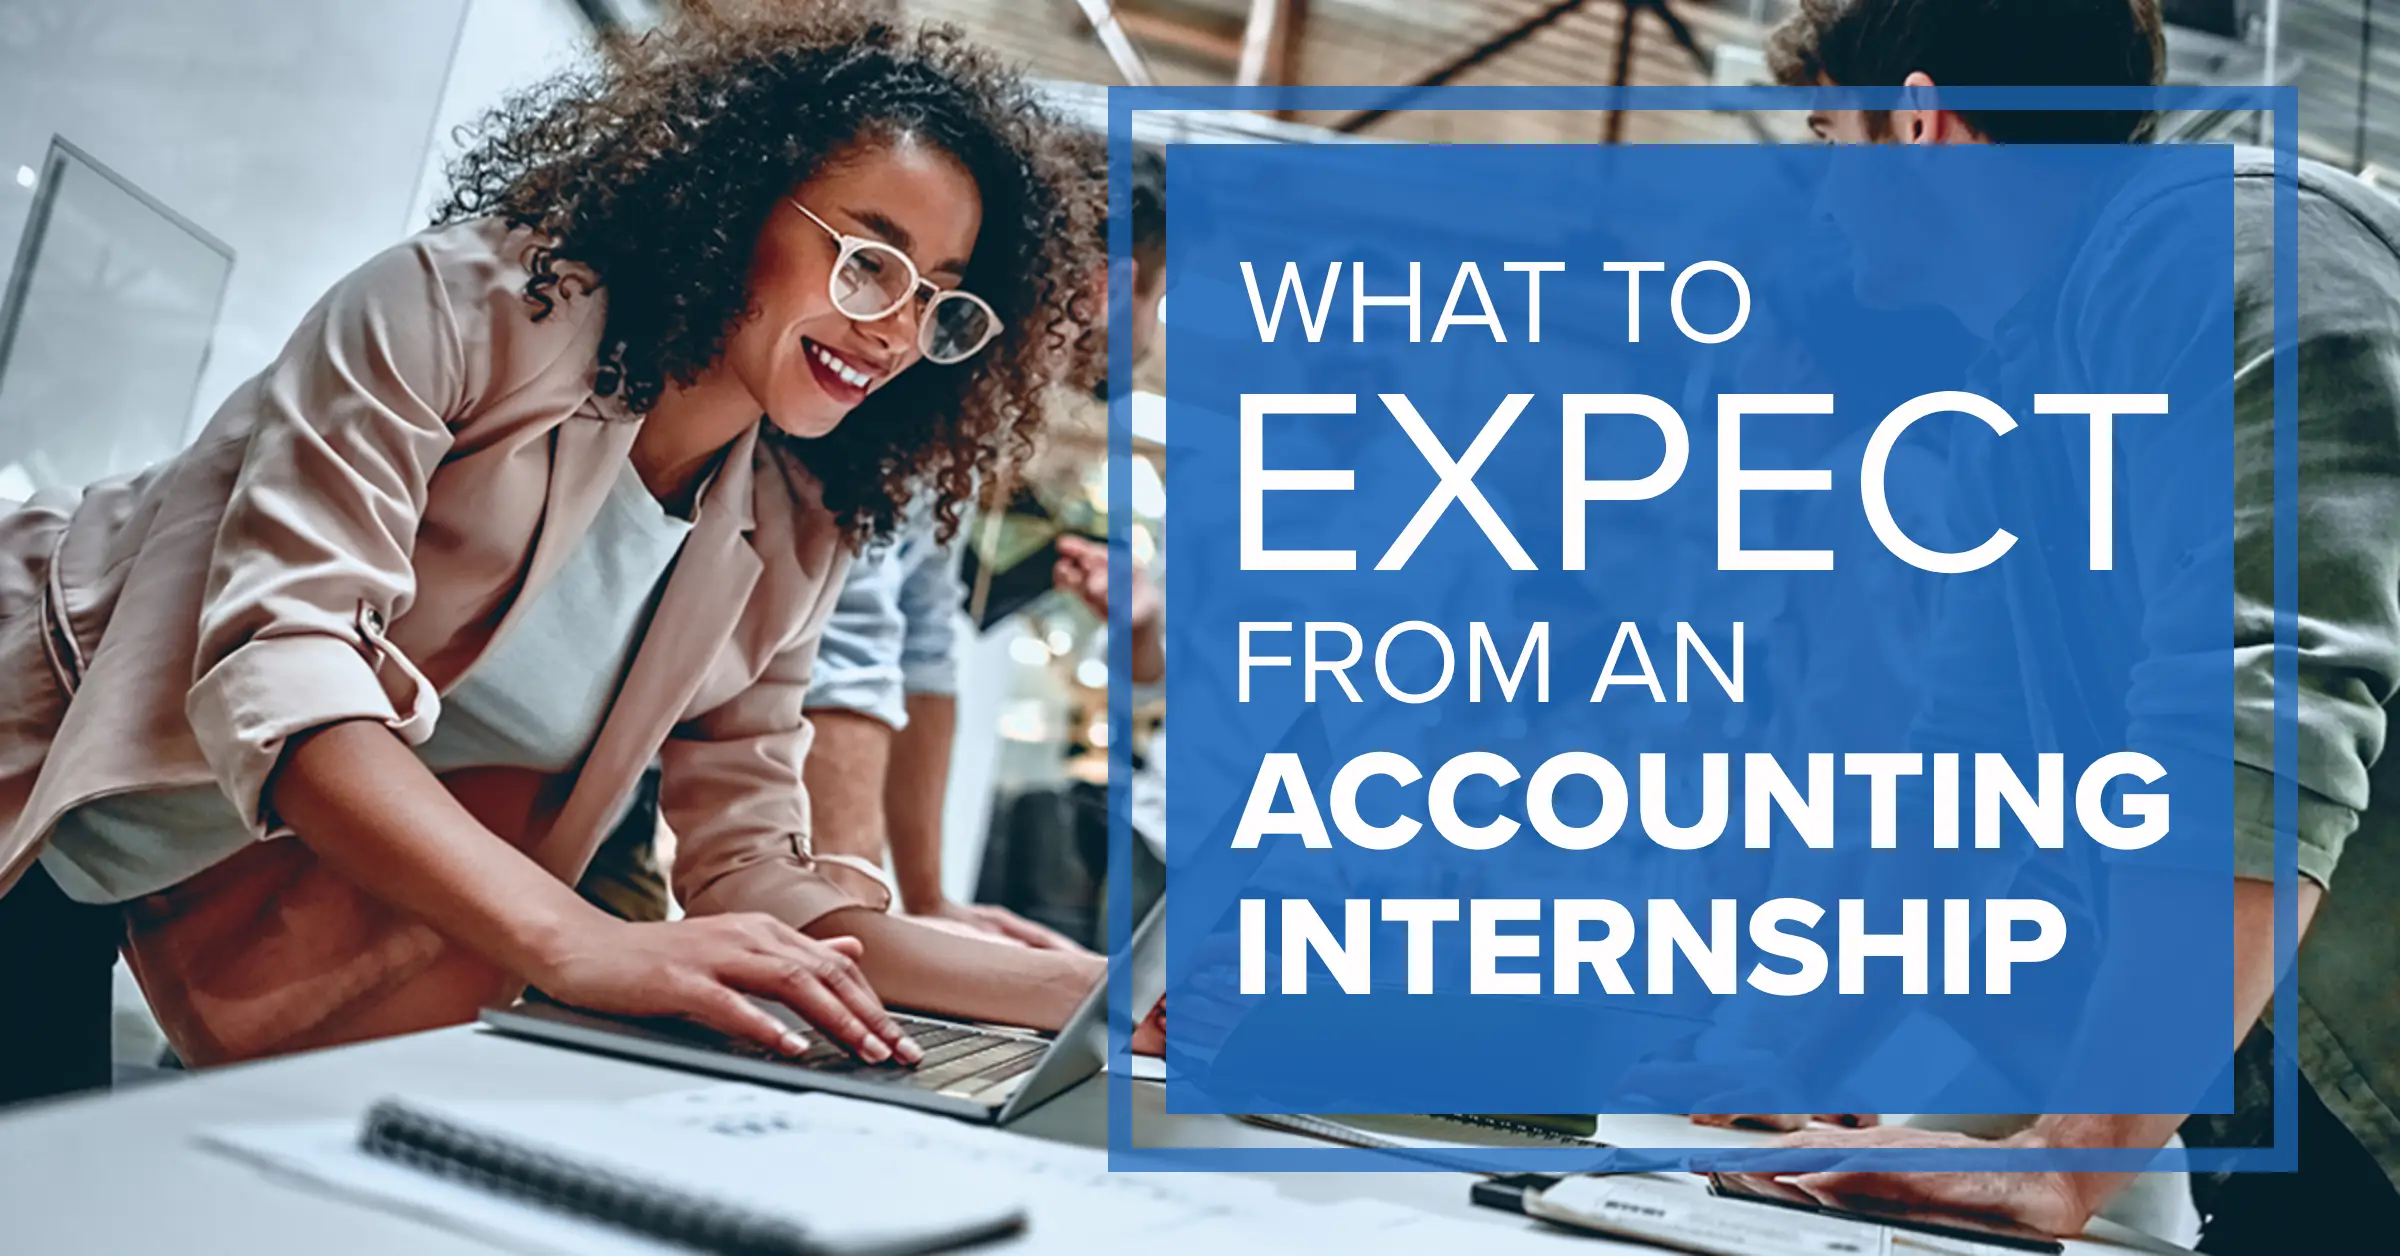 What to Expect From an Accounting Internship